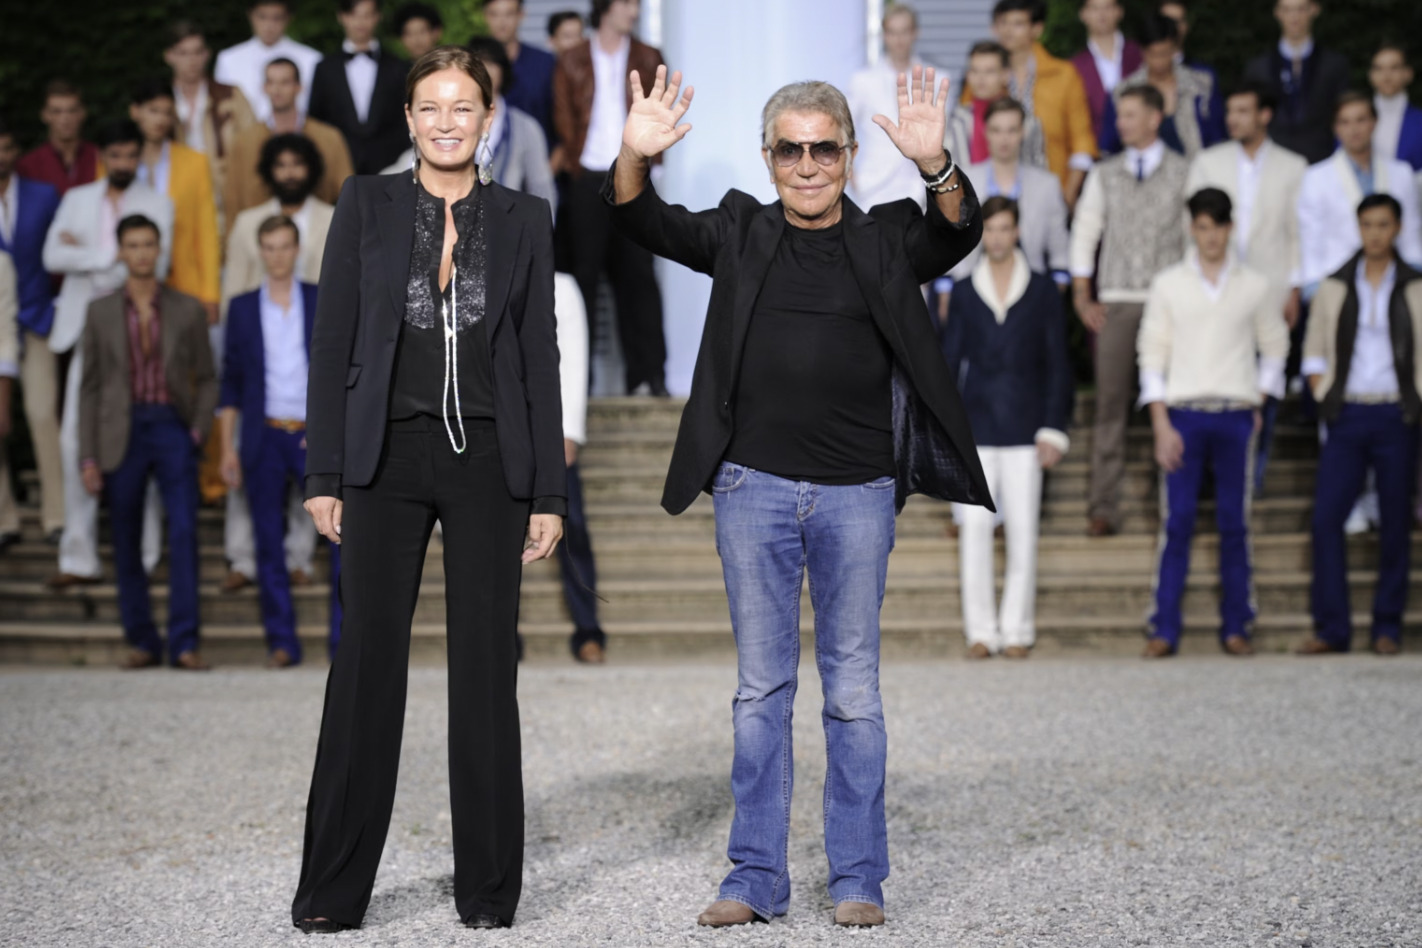 Fashion designer Roberto Cavalli and his wife Eva acknowledge the audience after the Roberto Cavalli Spring-Summer 2012 Menswear collection, June 18, 2011, during the Men's fashion week in Milan.Olivier Morin/AFP via Getty Images